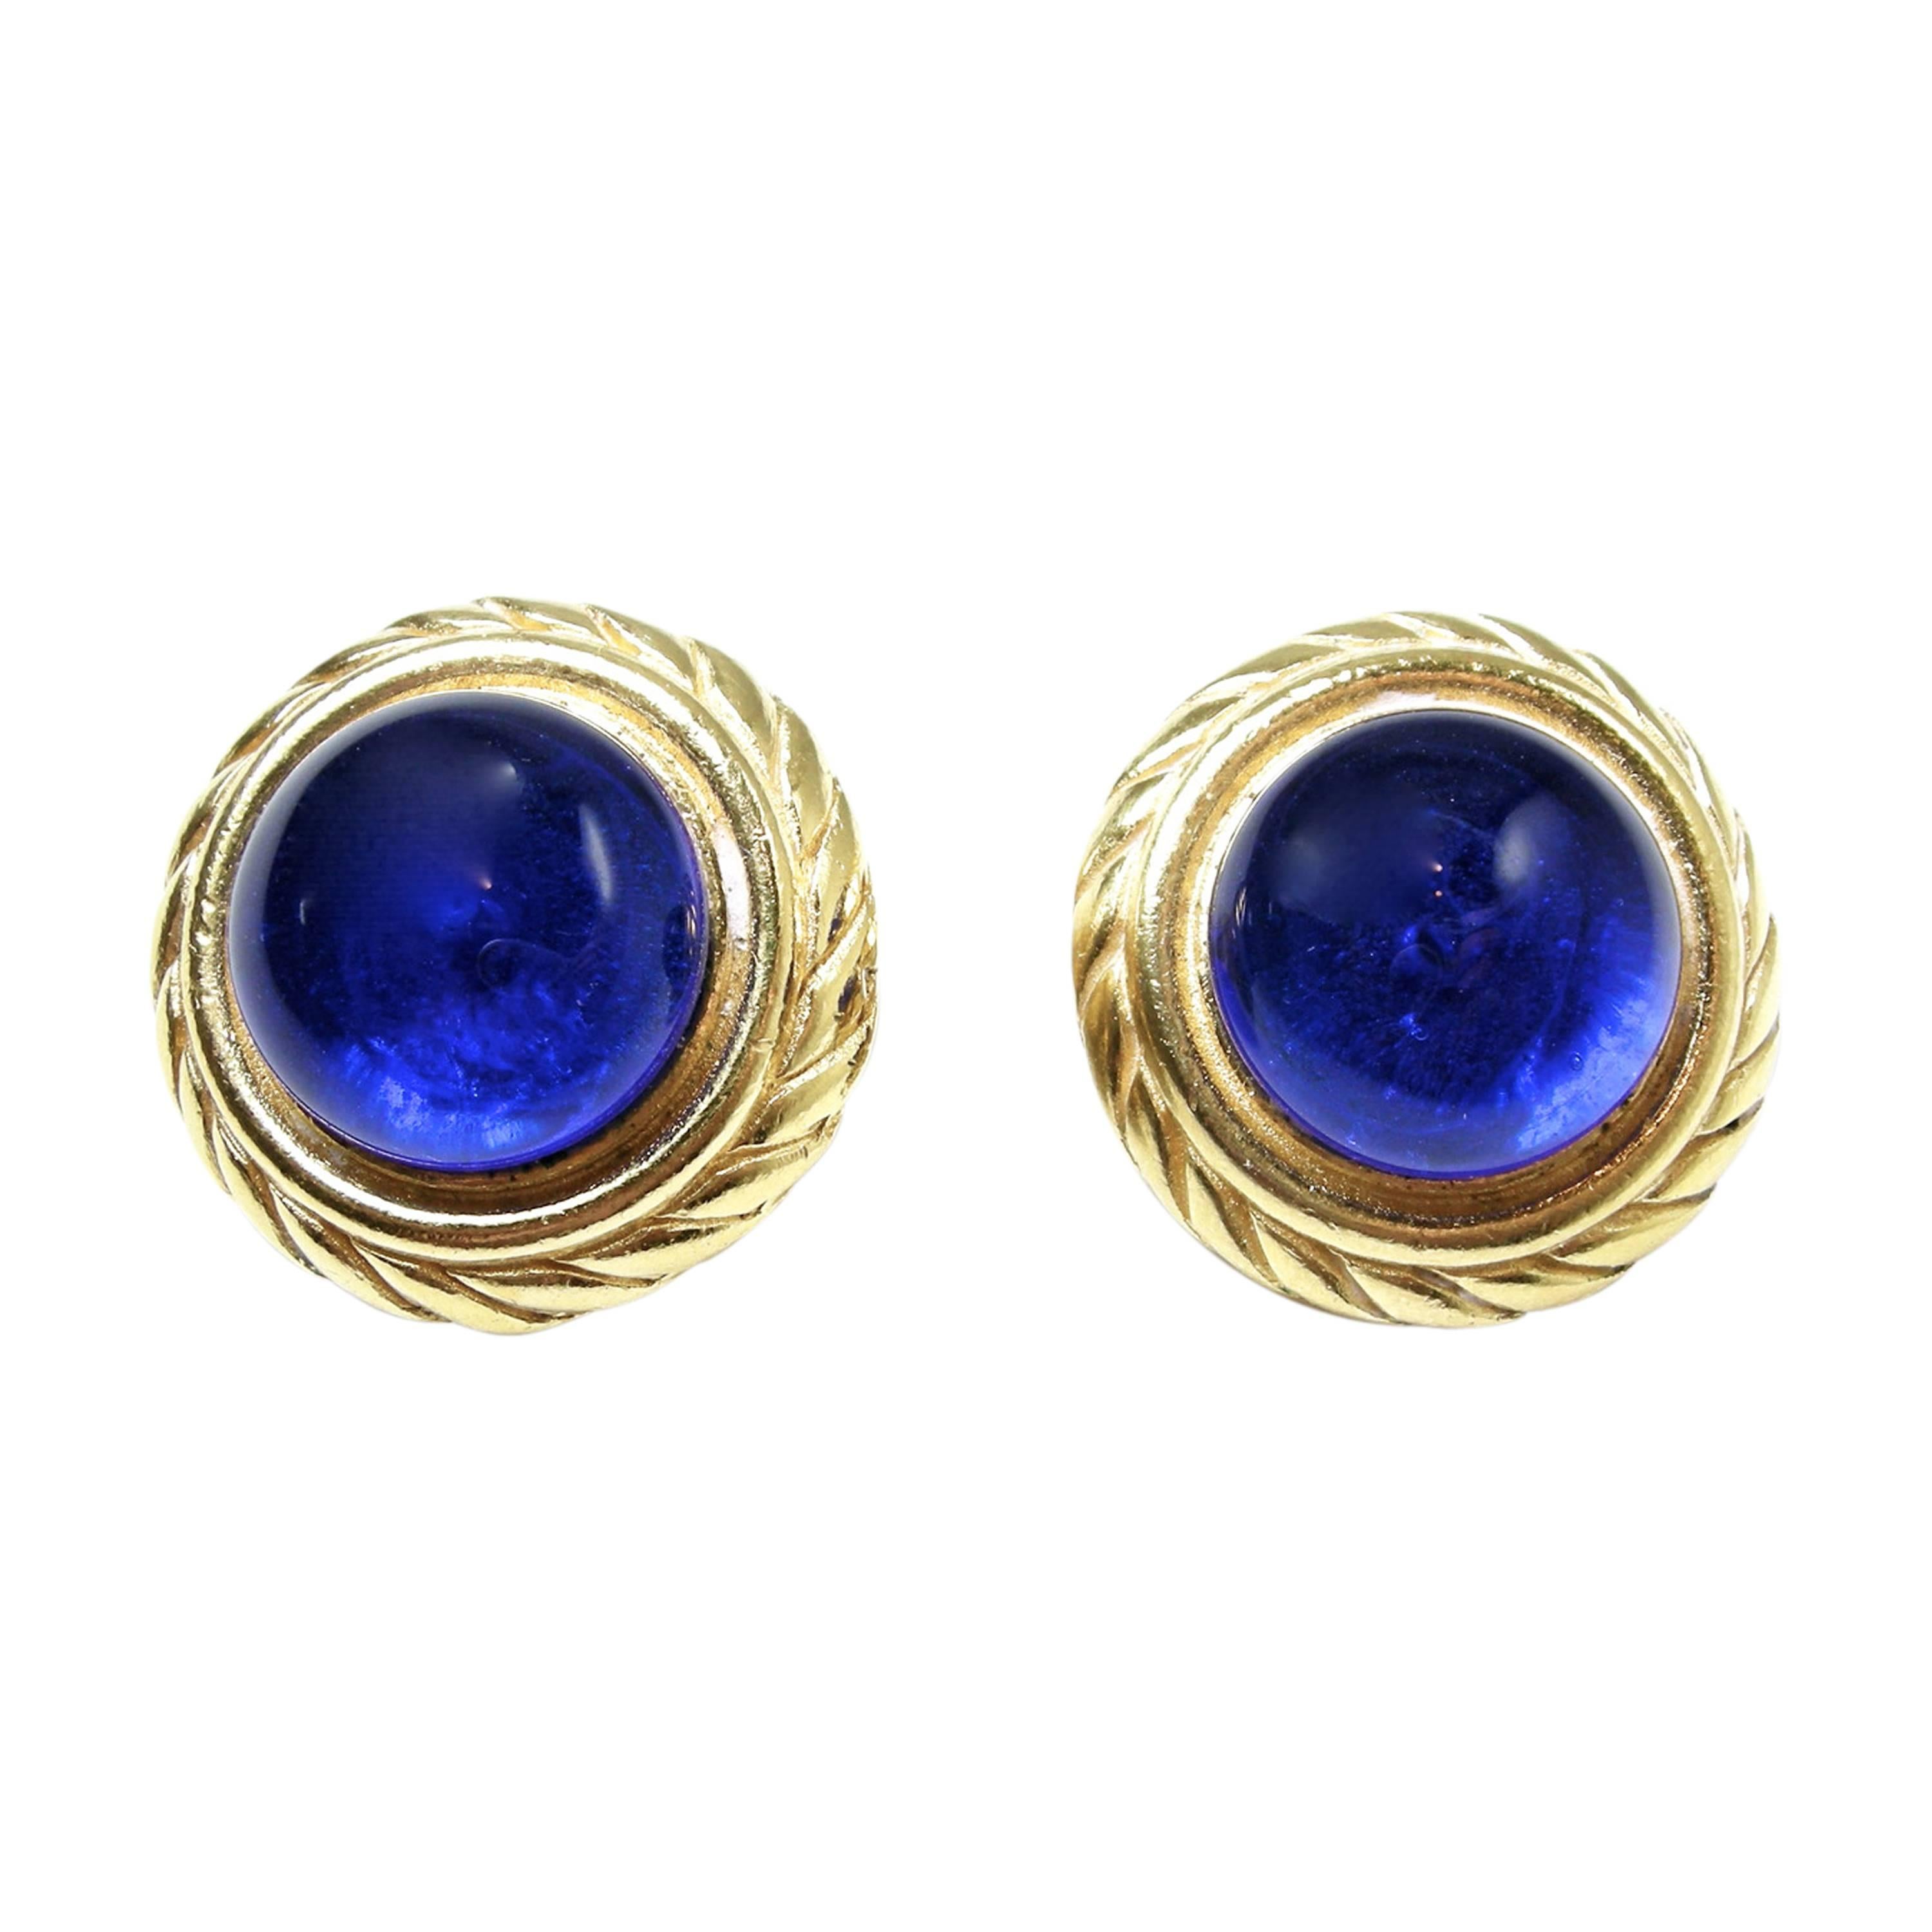 Vintage Signed Chanel Classic Blue Gripoix Earrings